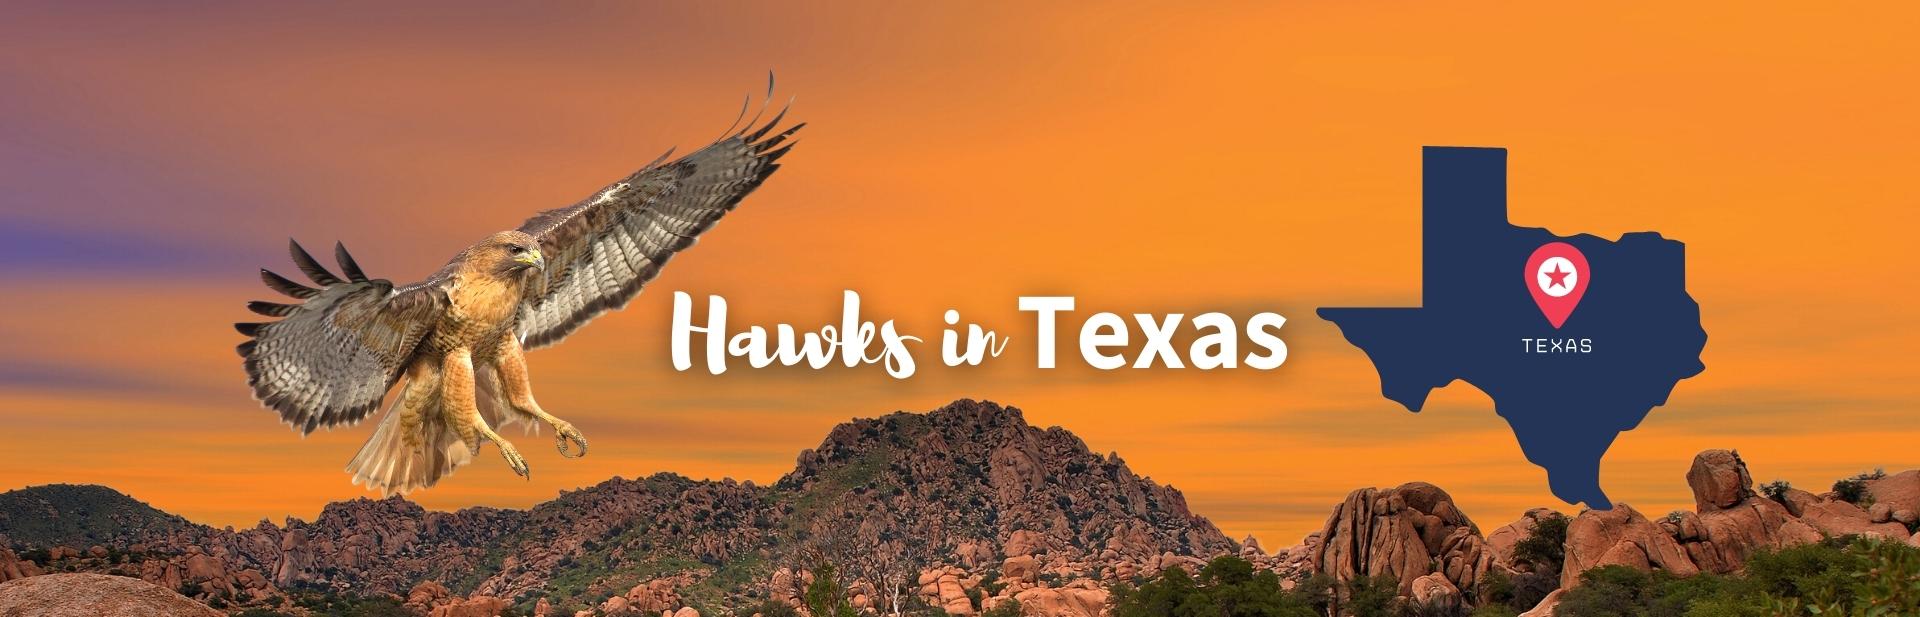 The 14 Species of Hawks in Texas and How You Can Spot Them